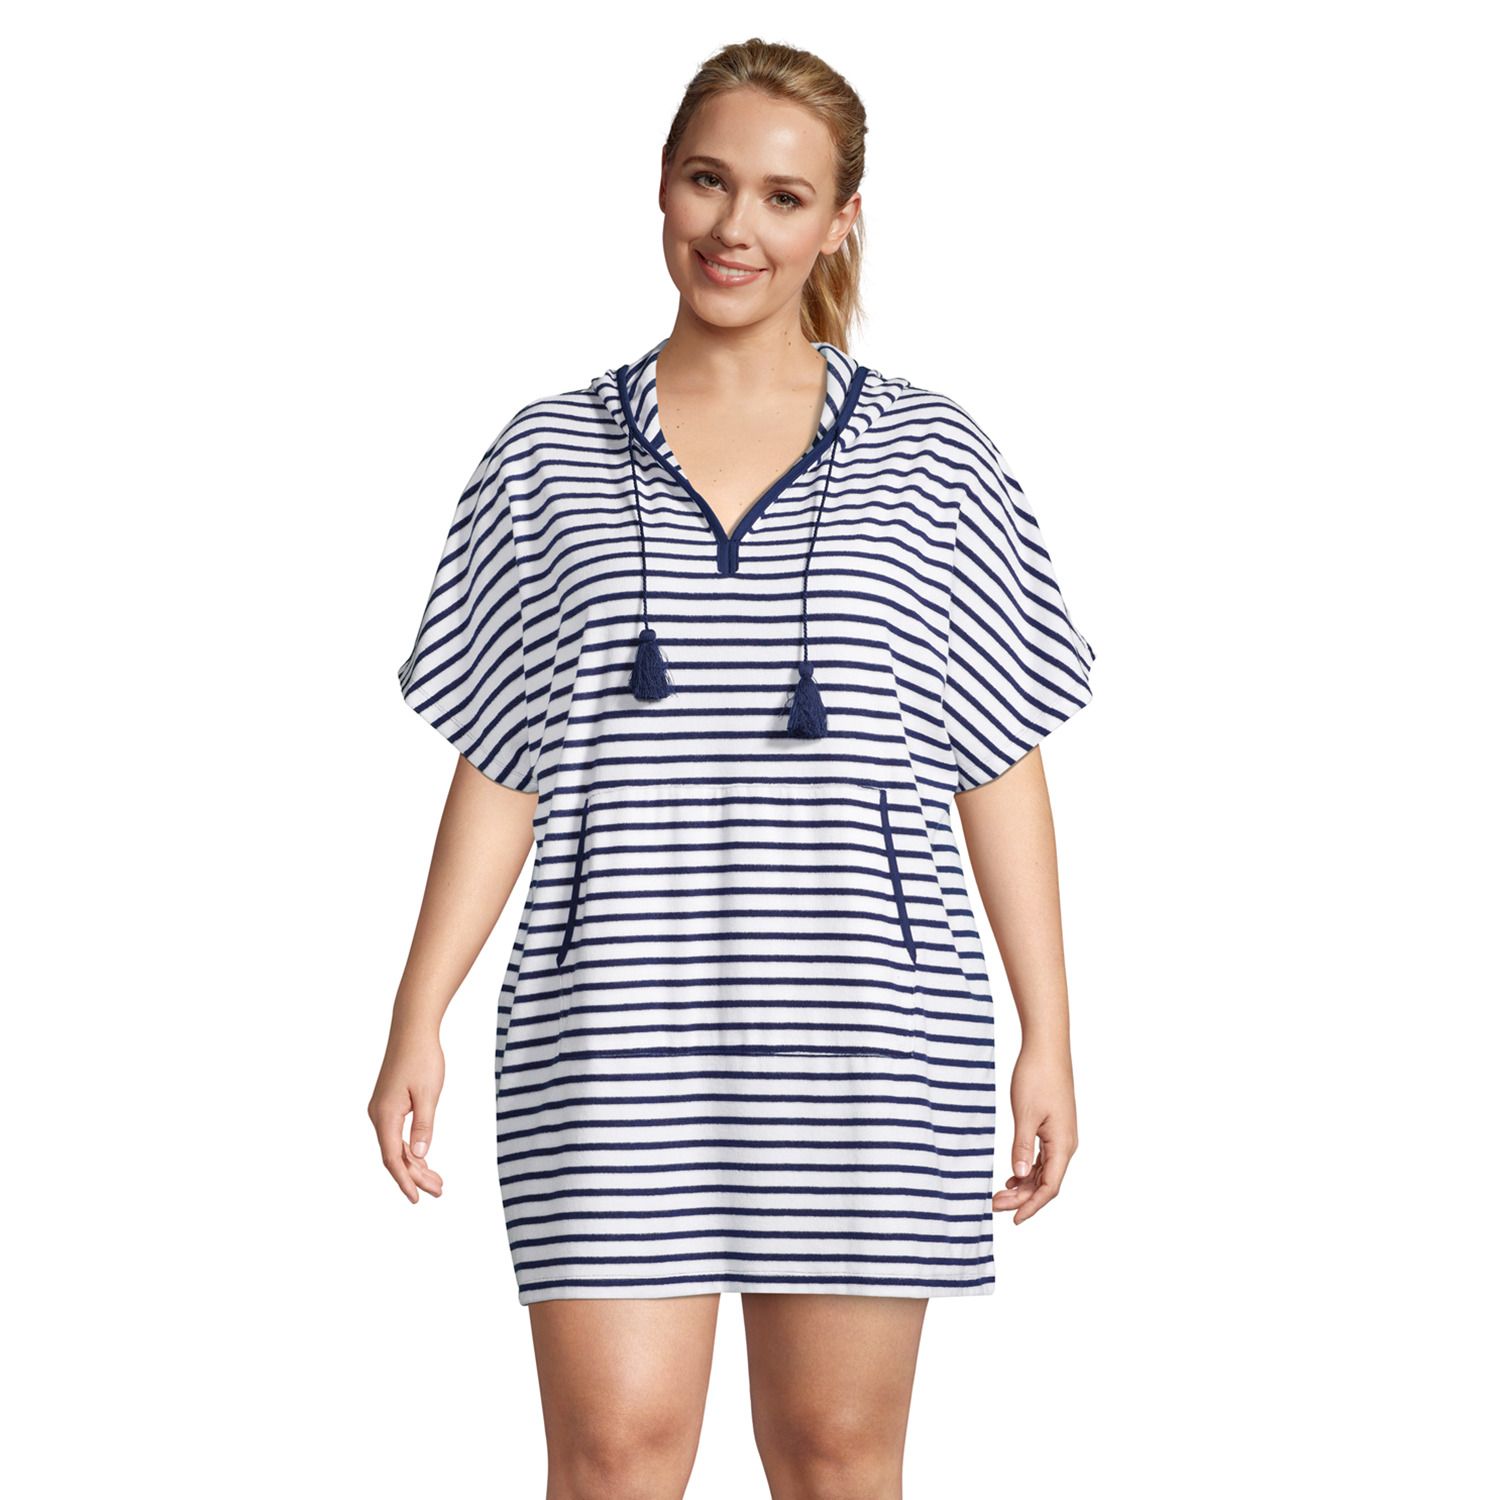 Image for Lands' End Plus Size Hooded Terry V-Neck Swim Cover-up Dress at Kohl's.